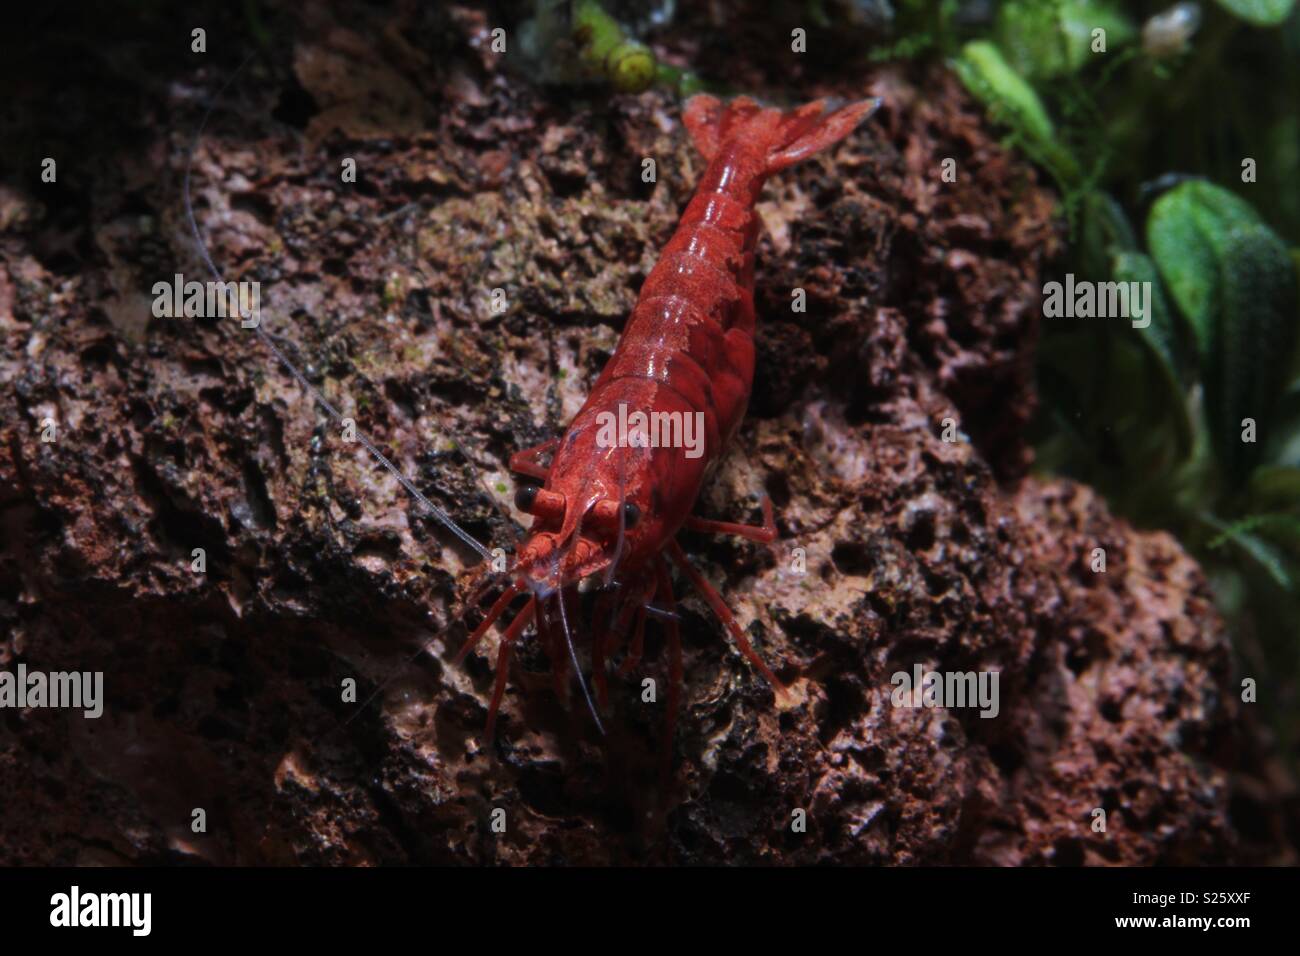 Painted Fire Red Shrimp Stock Photo